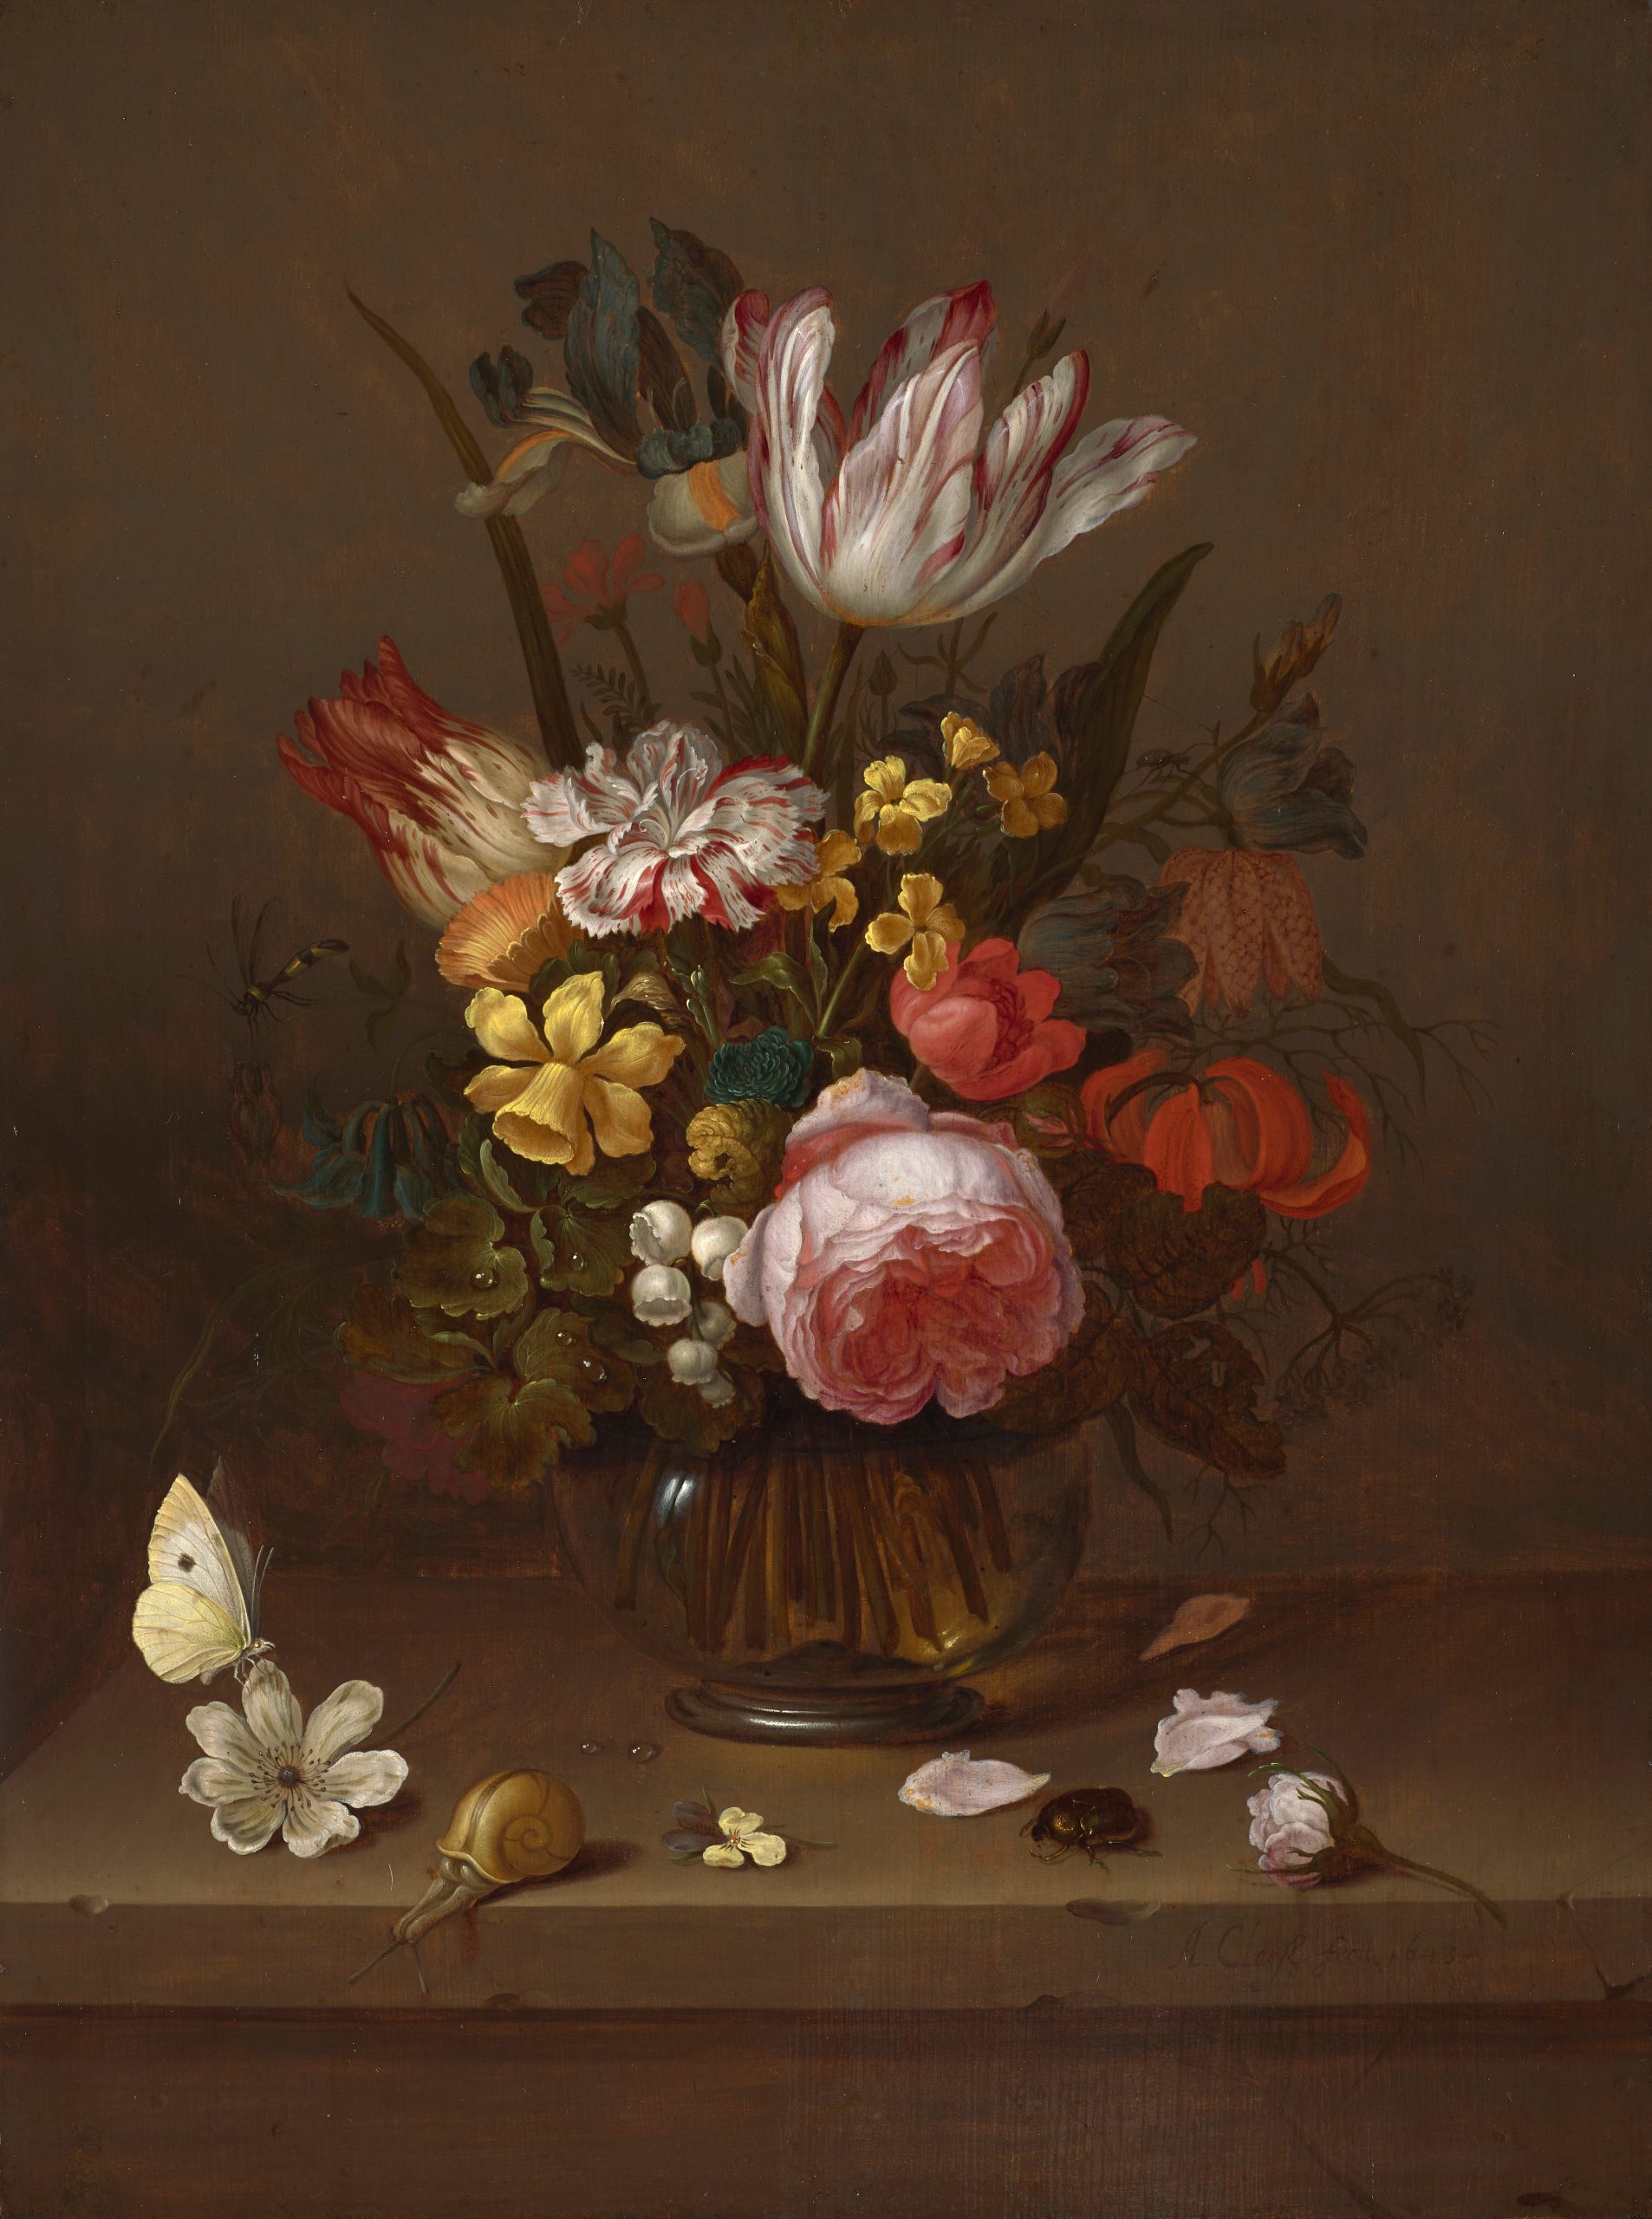 A Bouquet of Tulips, Roses, Daffodils and Carnations in a Glass Vase on the Table